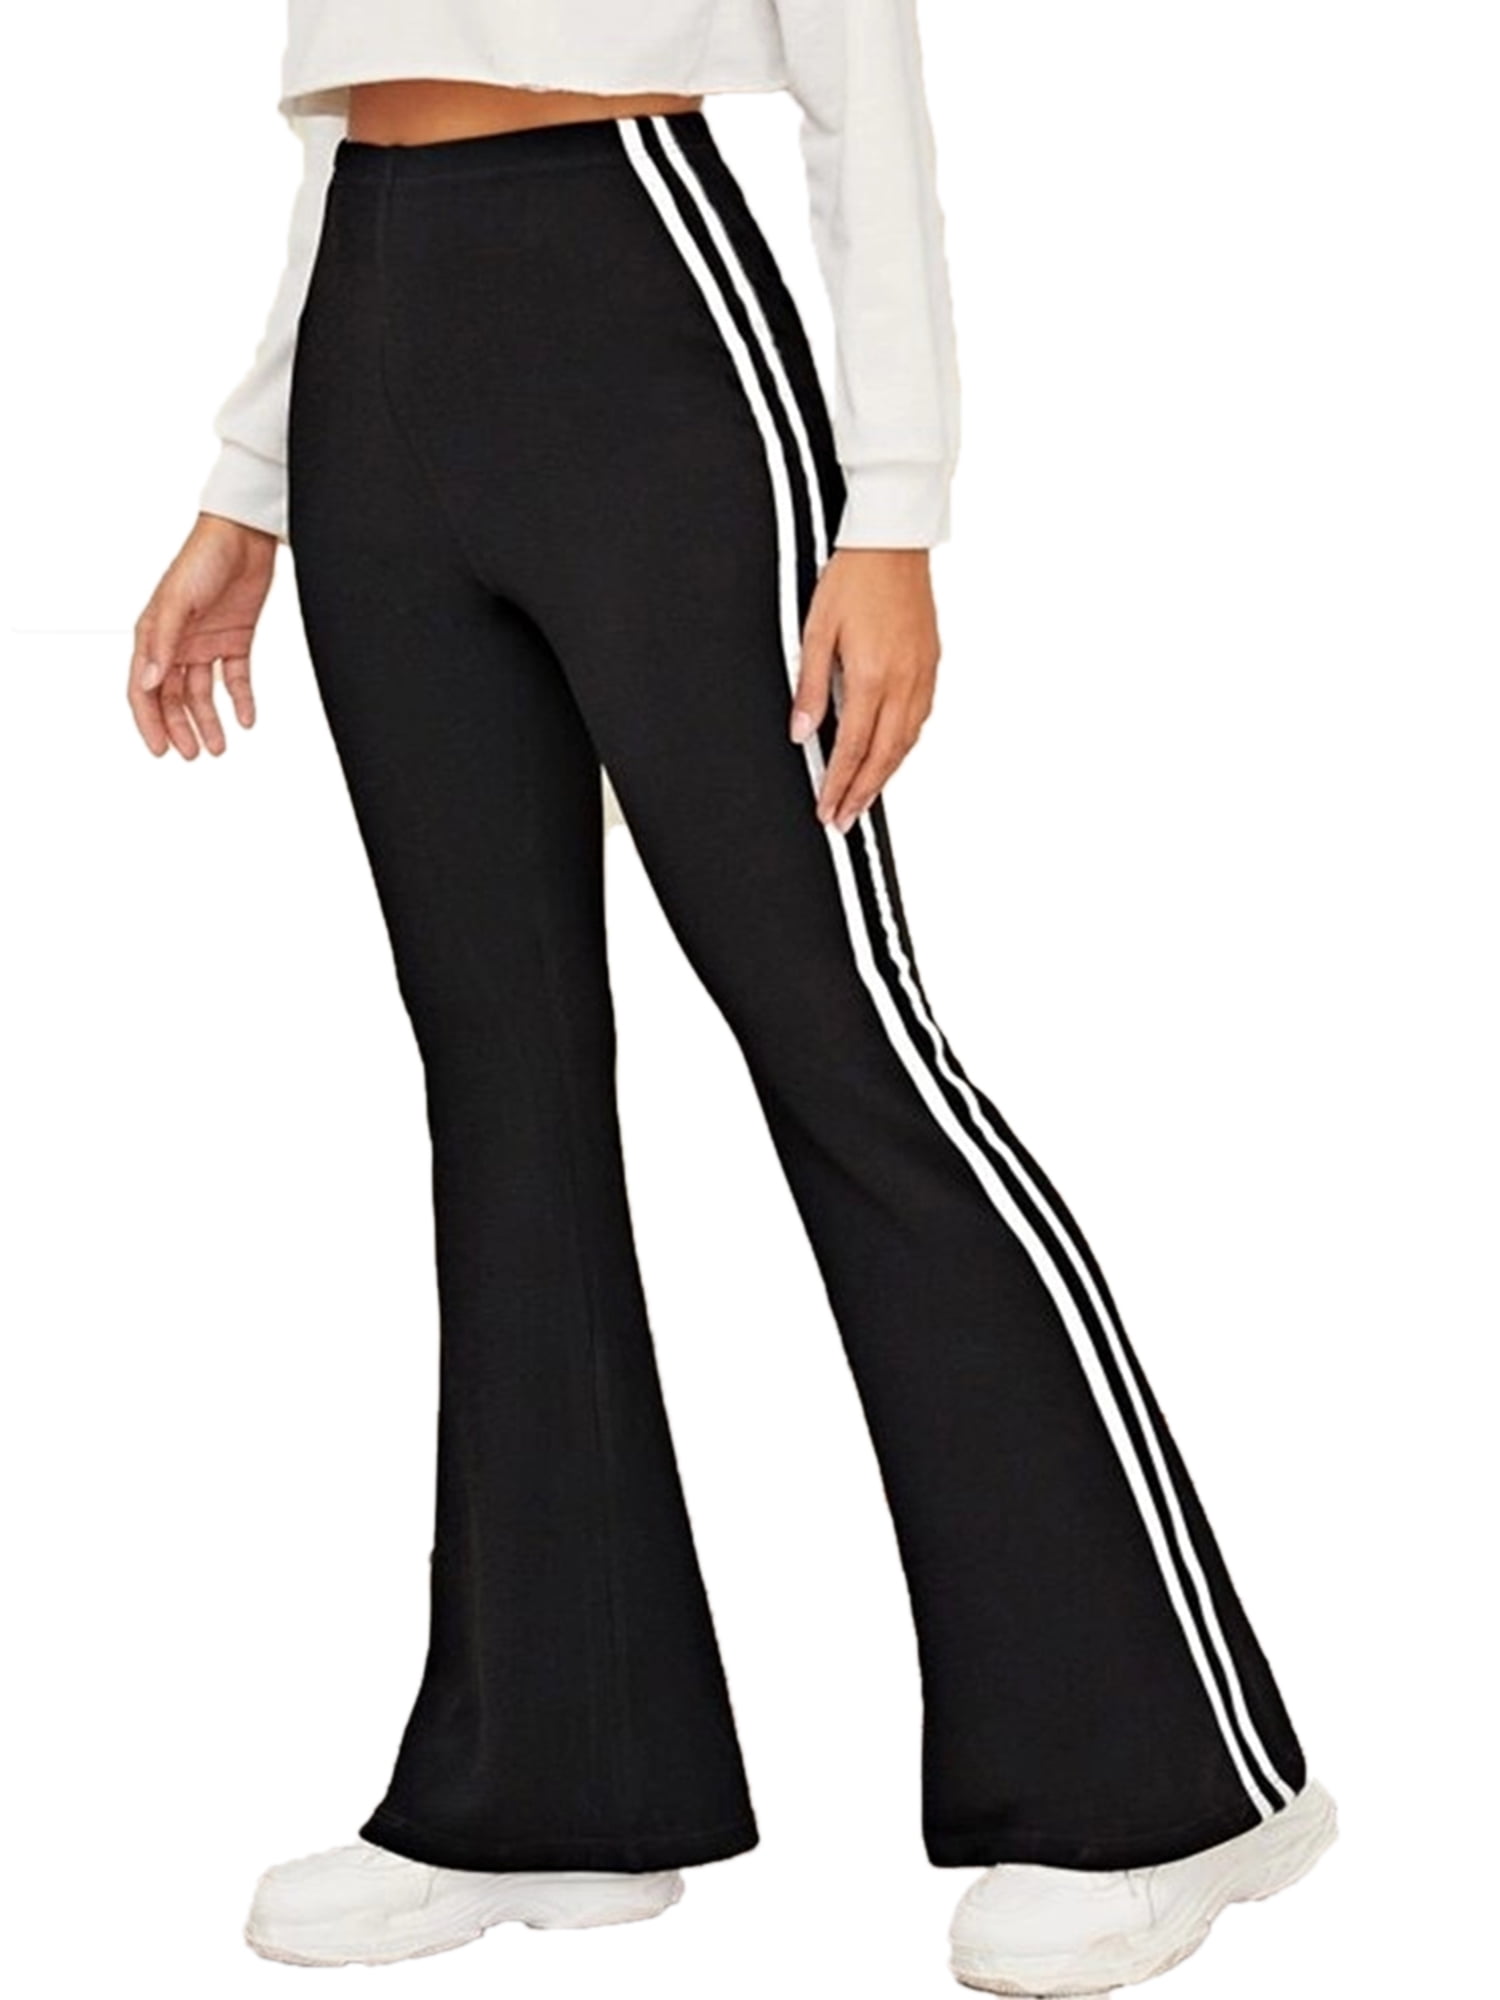 Sexy Dance Woman Lady Jogging Flared Pants Yoga Workout Bell